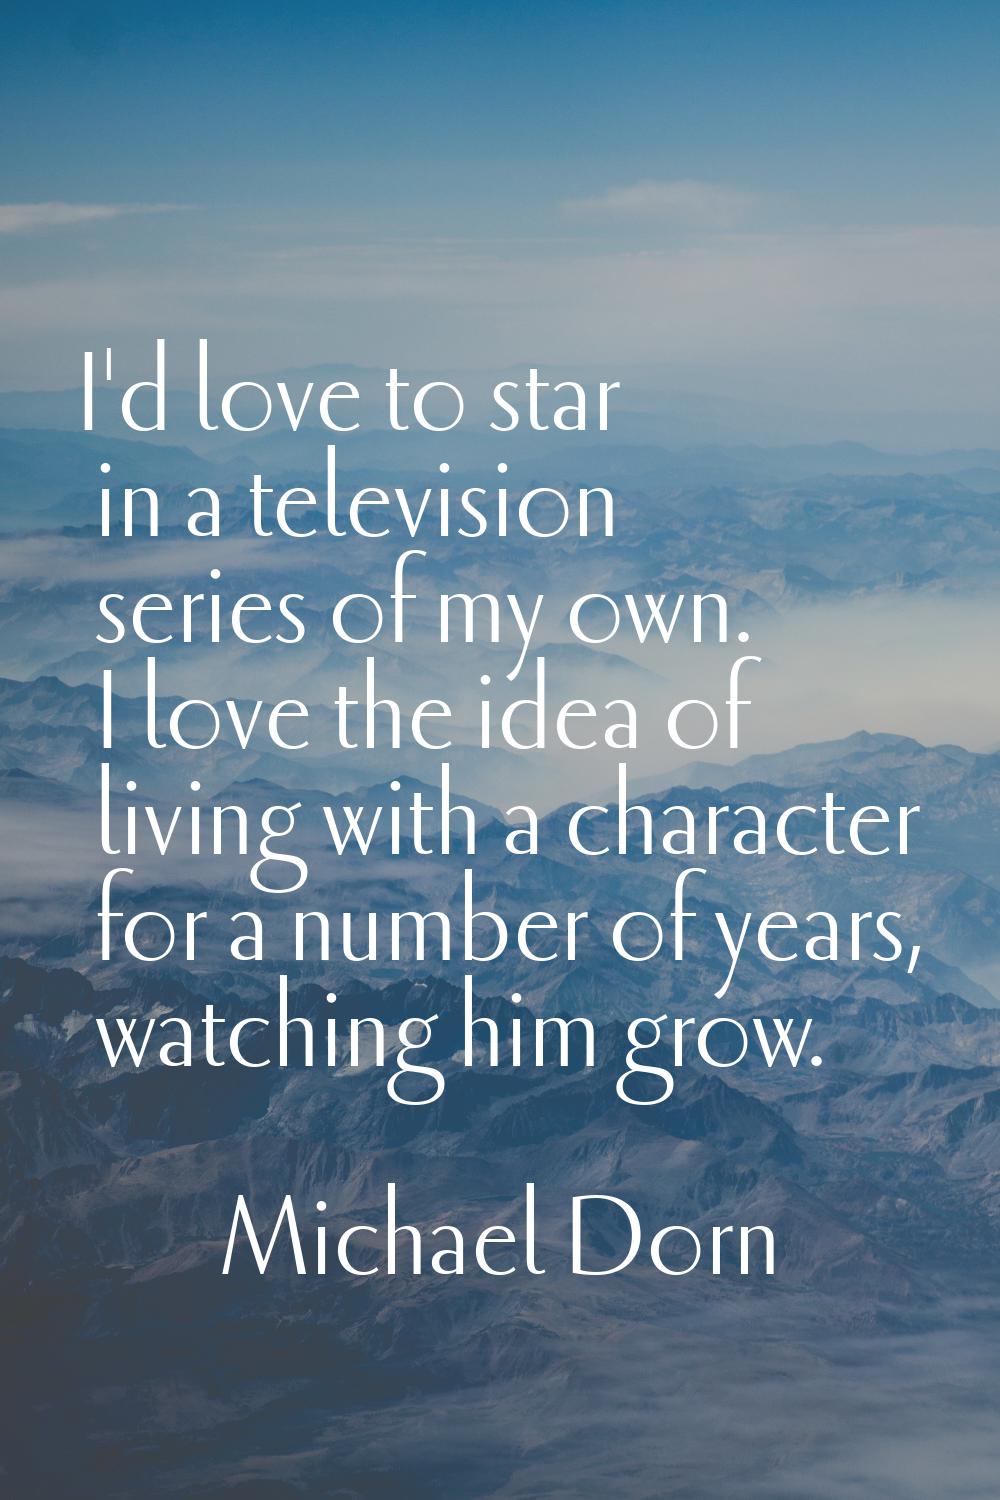 I'd love to star in a television series of my own. I love the idea of living with a character for a